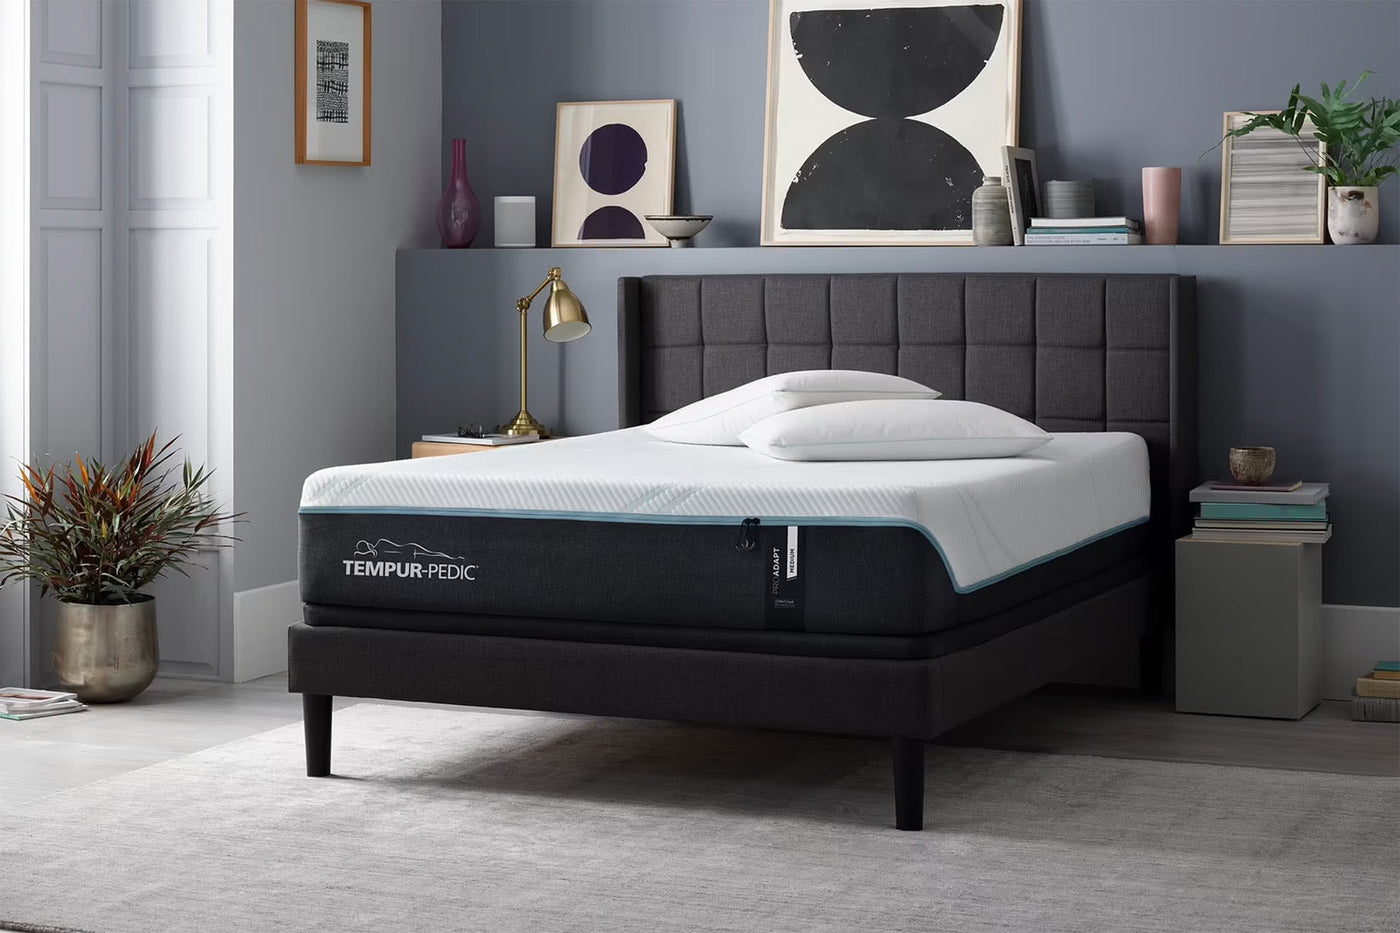 Tempur mattress range available at Hunters Furniture Derby